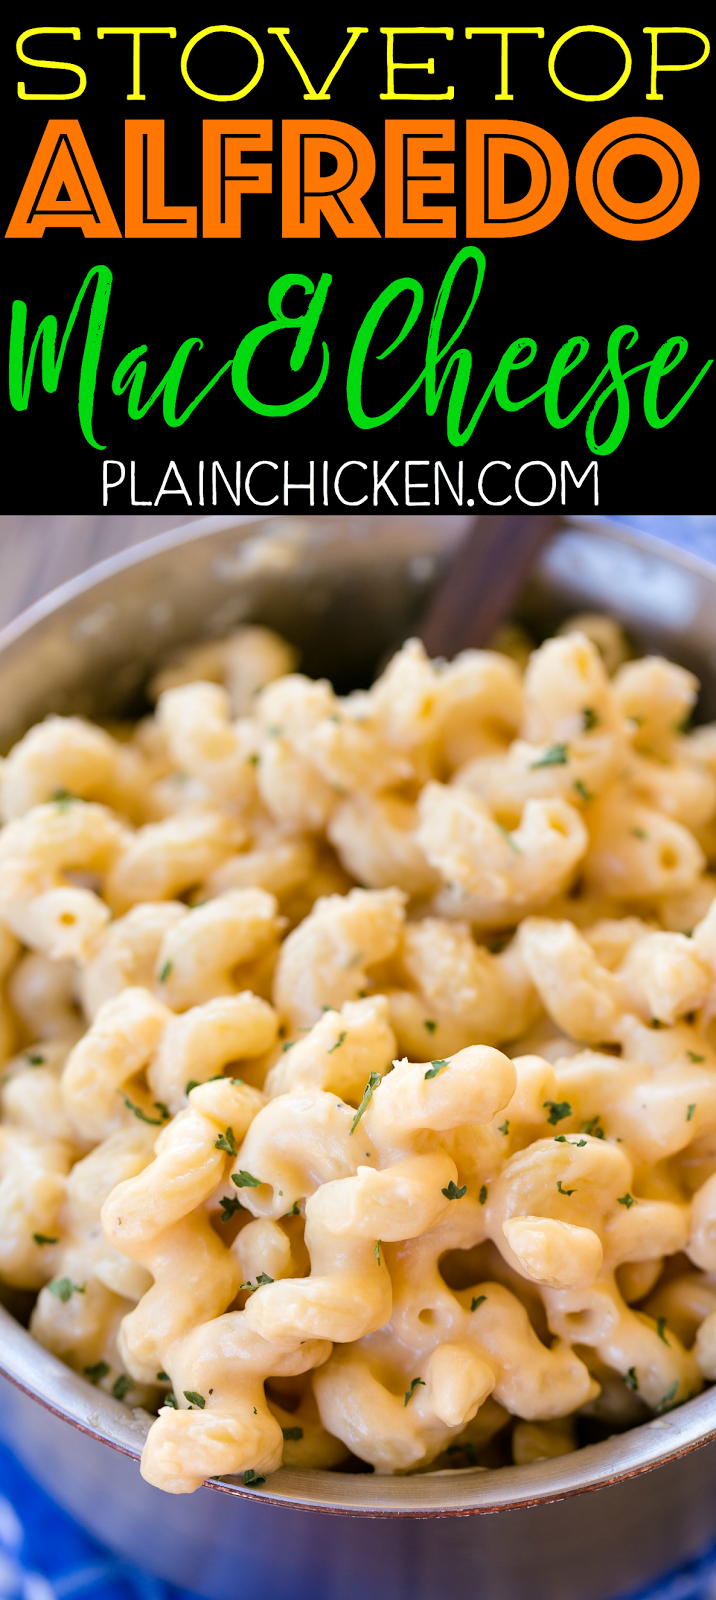 Stovetop Alfredo Mac & Cheese - ready in 10 minutes! We make this all the time! SO easy and SOOOO delicious! Only 5 ingredients! Pasta tossed in jarred Alfredo sauce, cheddar cheese, parmesan cheese and garlic. Perfect weeknight side dish. Great with steak, chicken and pork. 